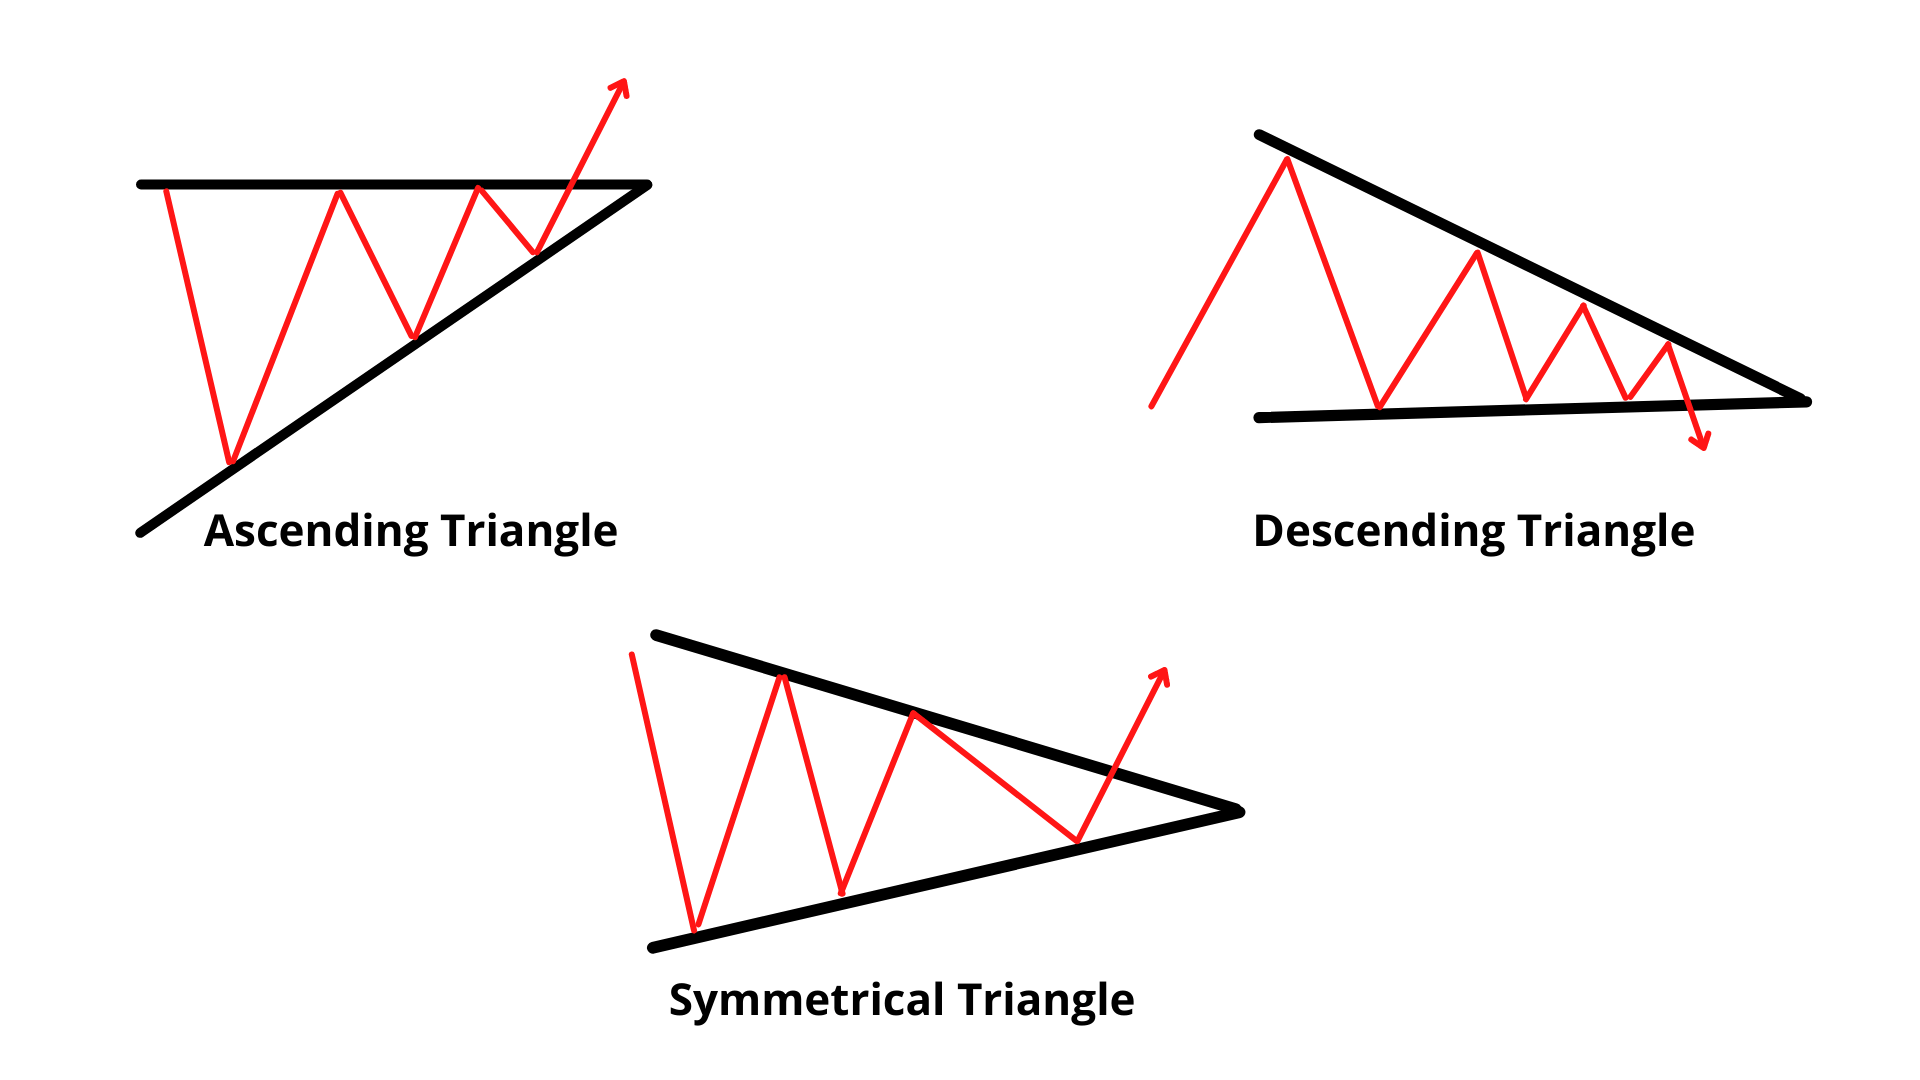 Different types of triangles in a single image